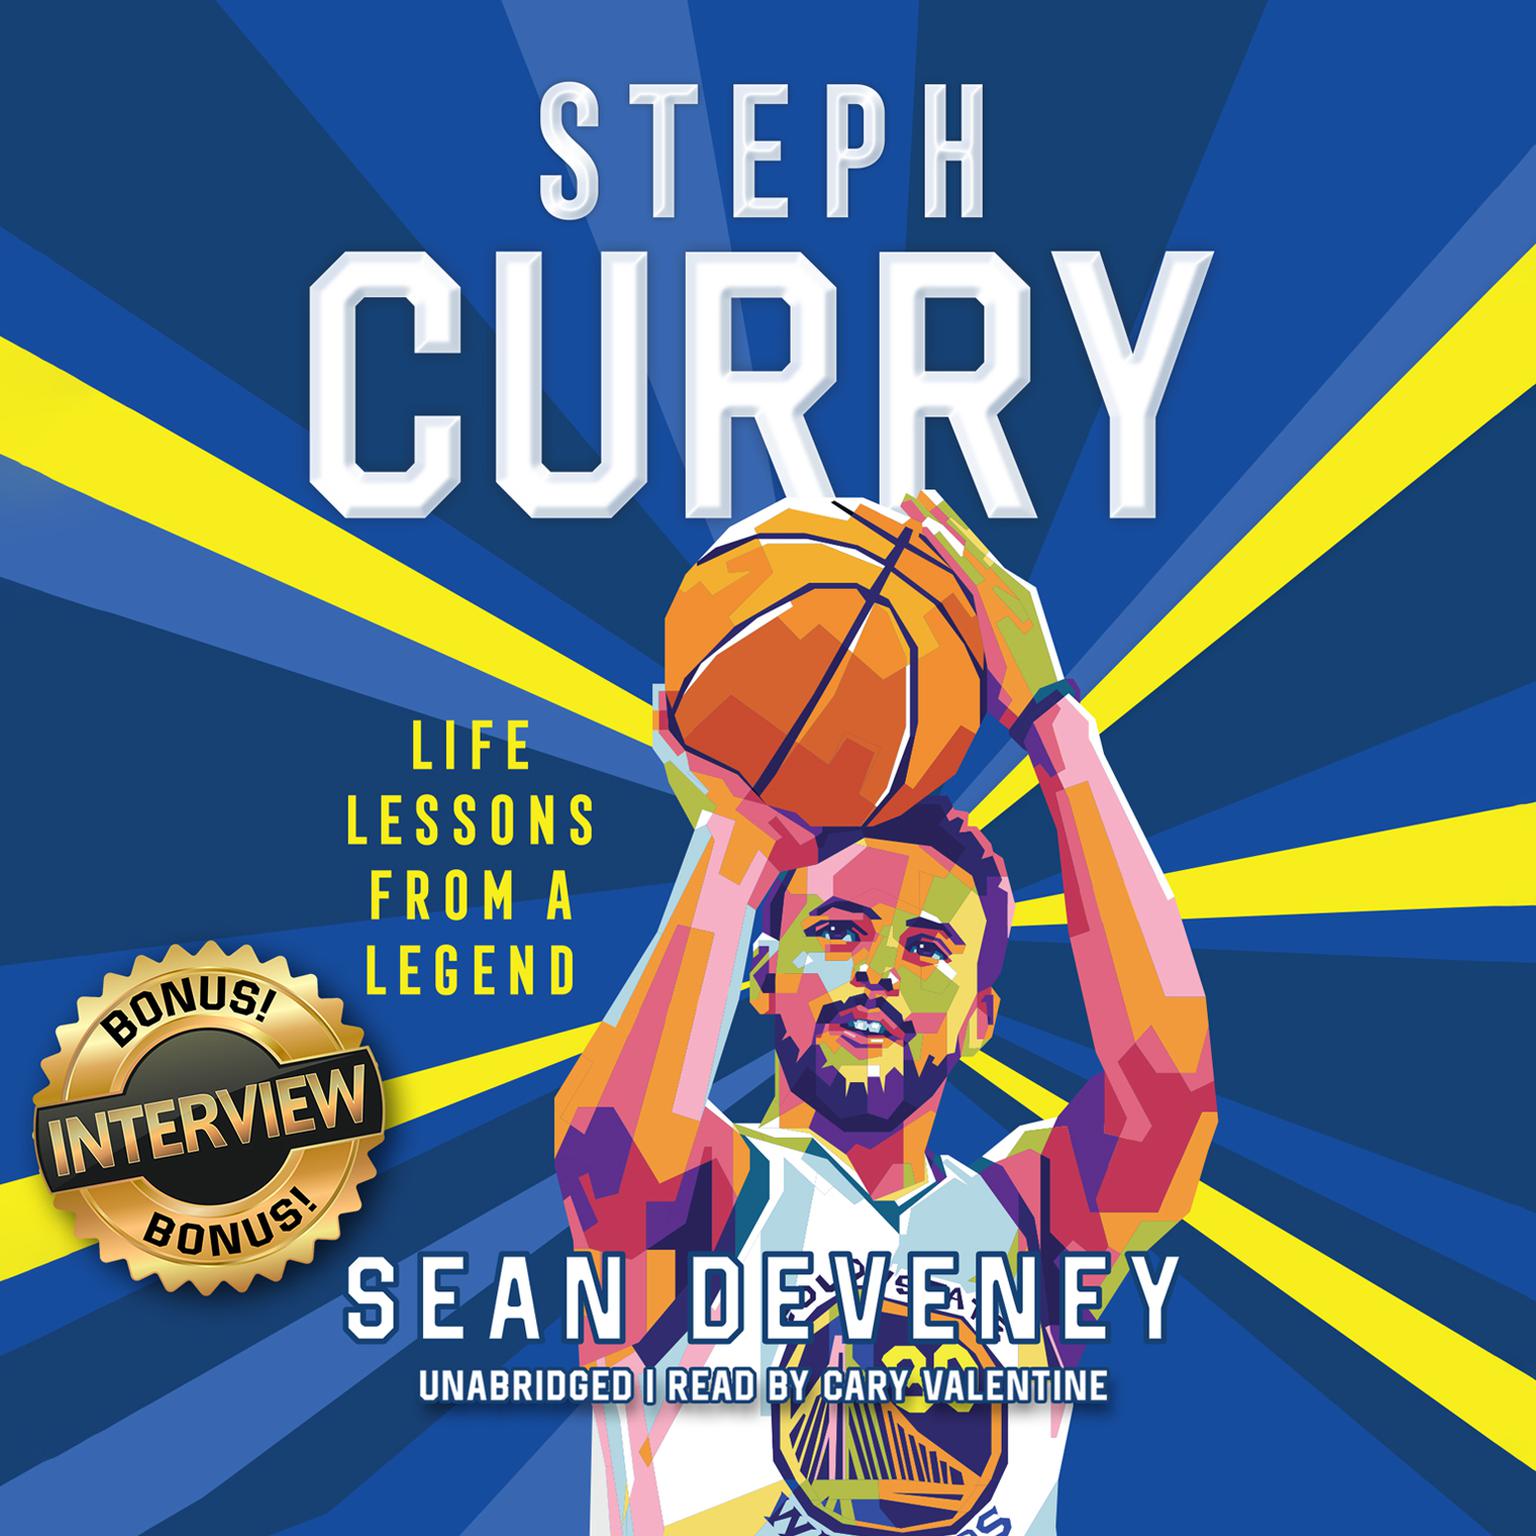 Steph Curry: Life Lessons From a Legend  Audiobook, by Sean Deveney